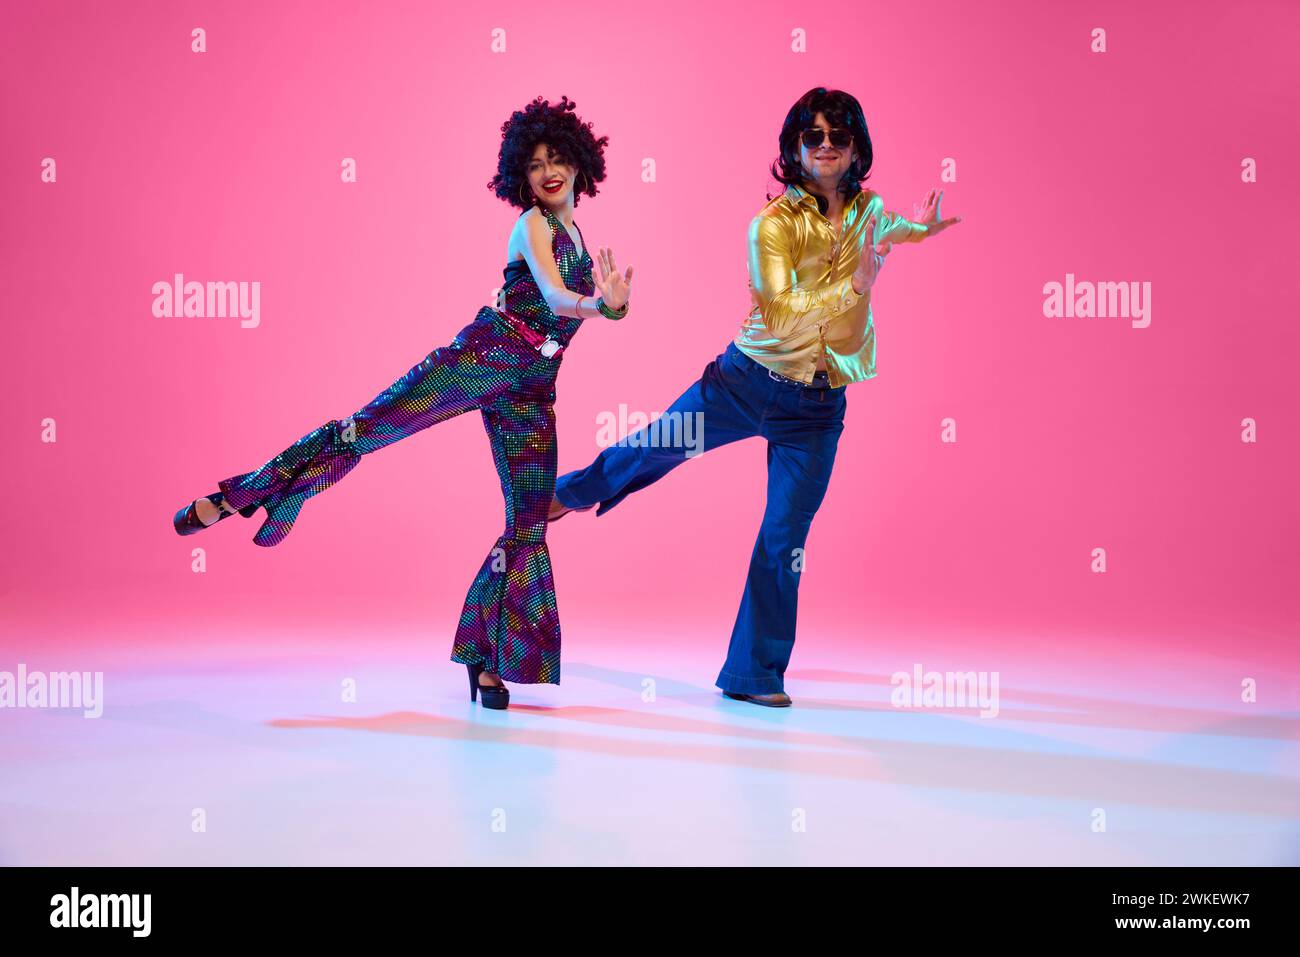 Retro disco era fashion. Couple with funky hairstyles and groovy clothes dancing energetic dance against gradient pink studio background. Stock Photo